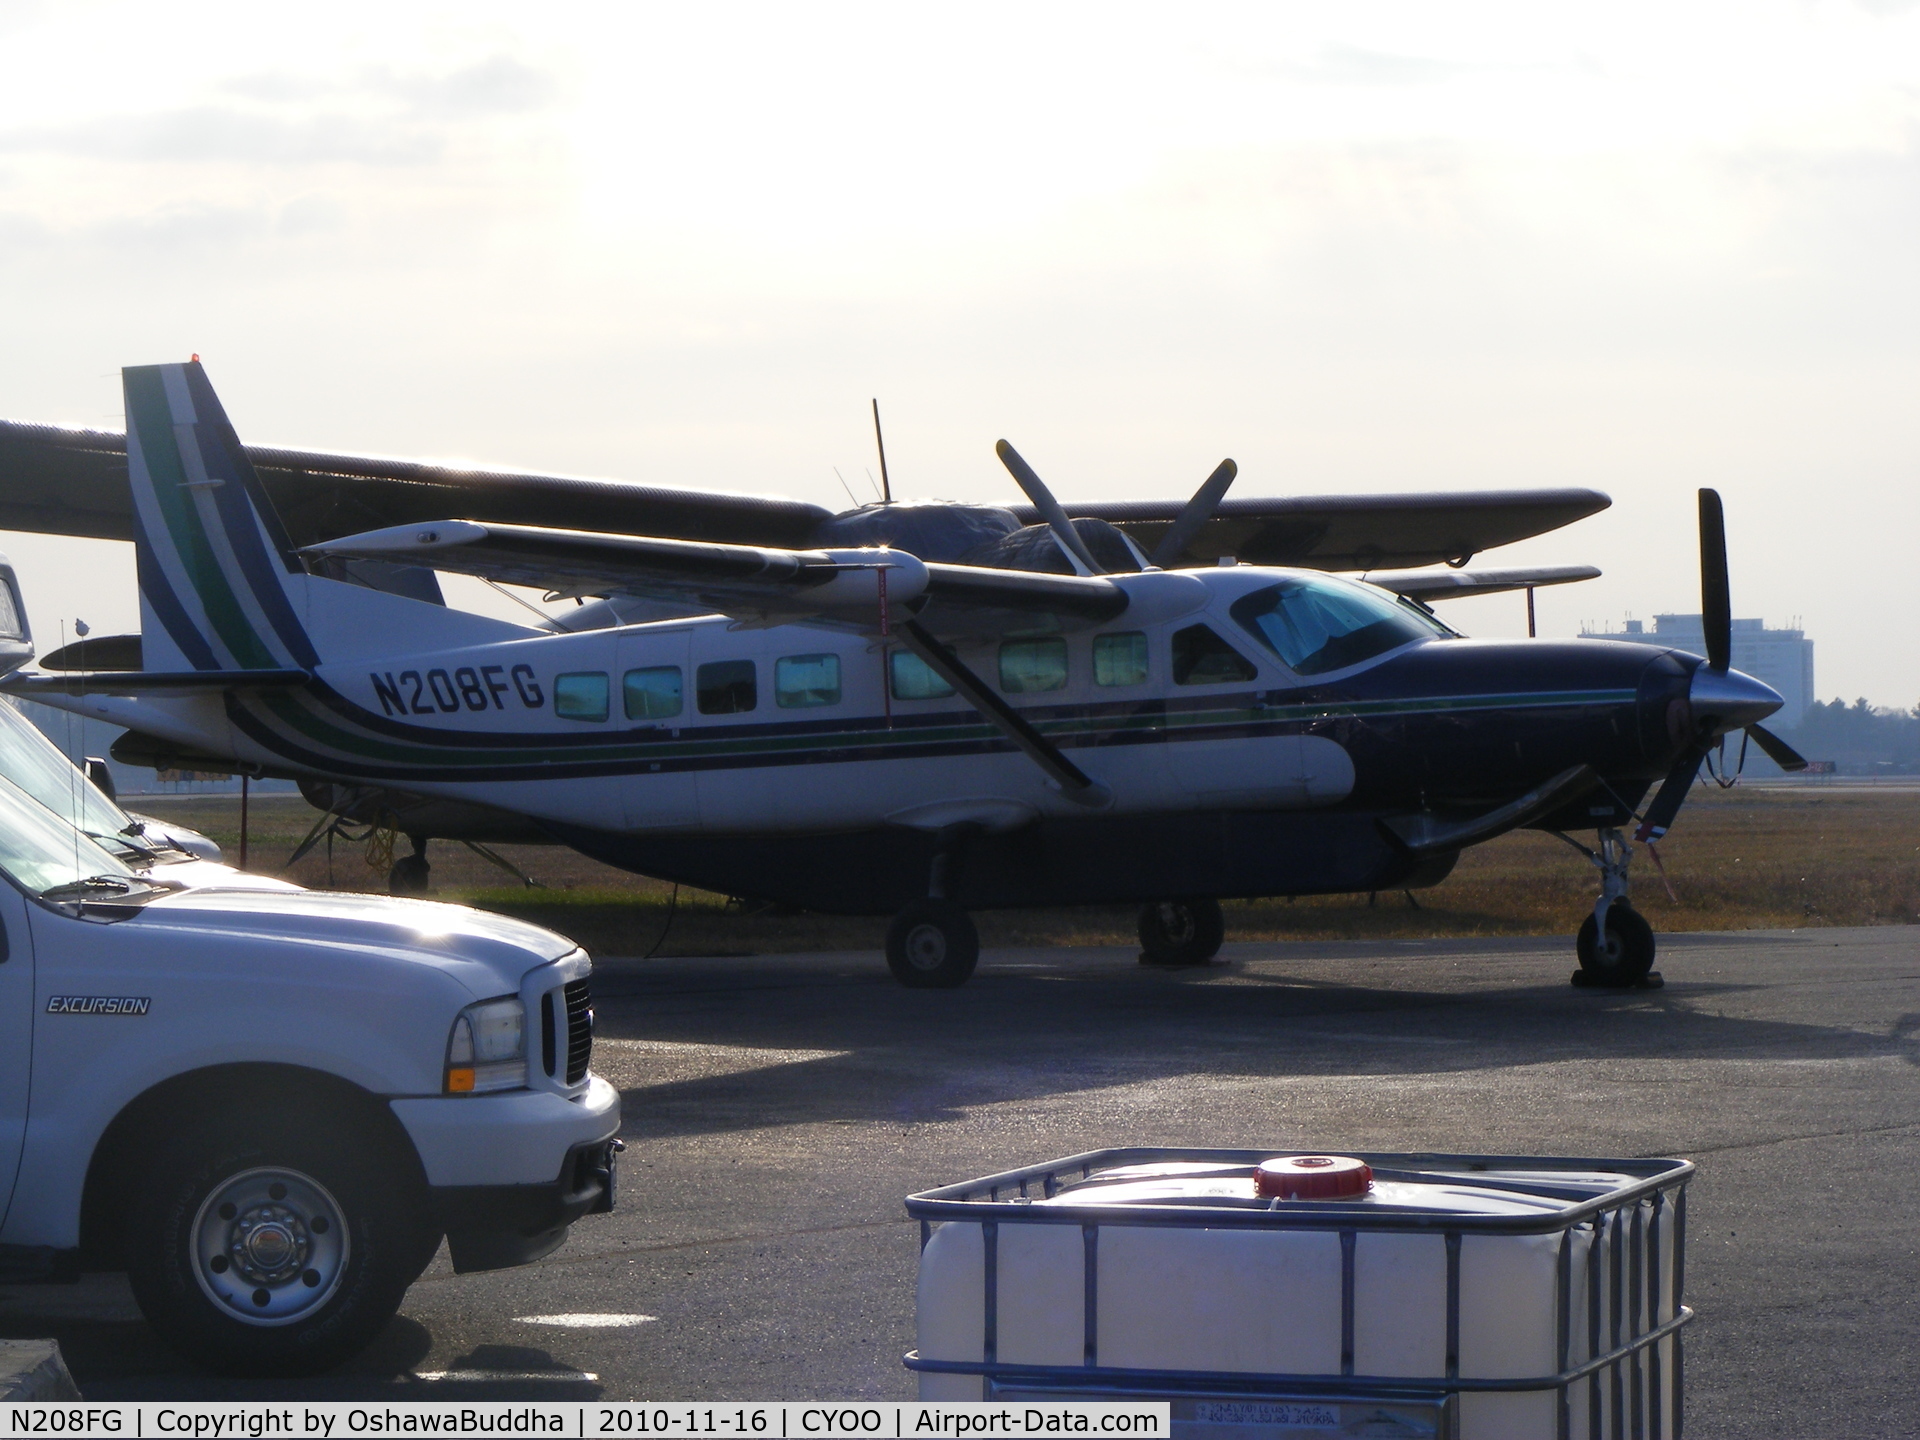 N208FG, 2003 Cessna 208B C/N 208B1021, Yet another visitor to the Enterprise Air's hangers in Oshawa